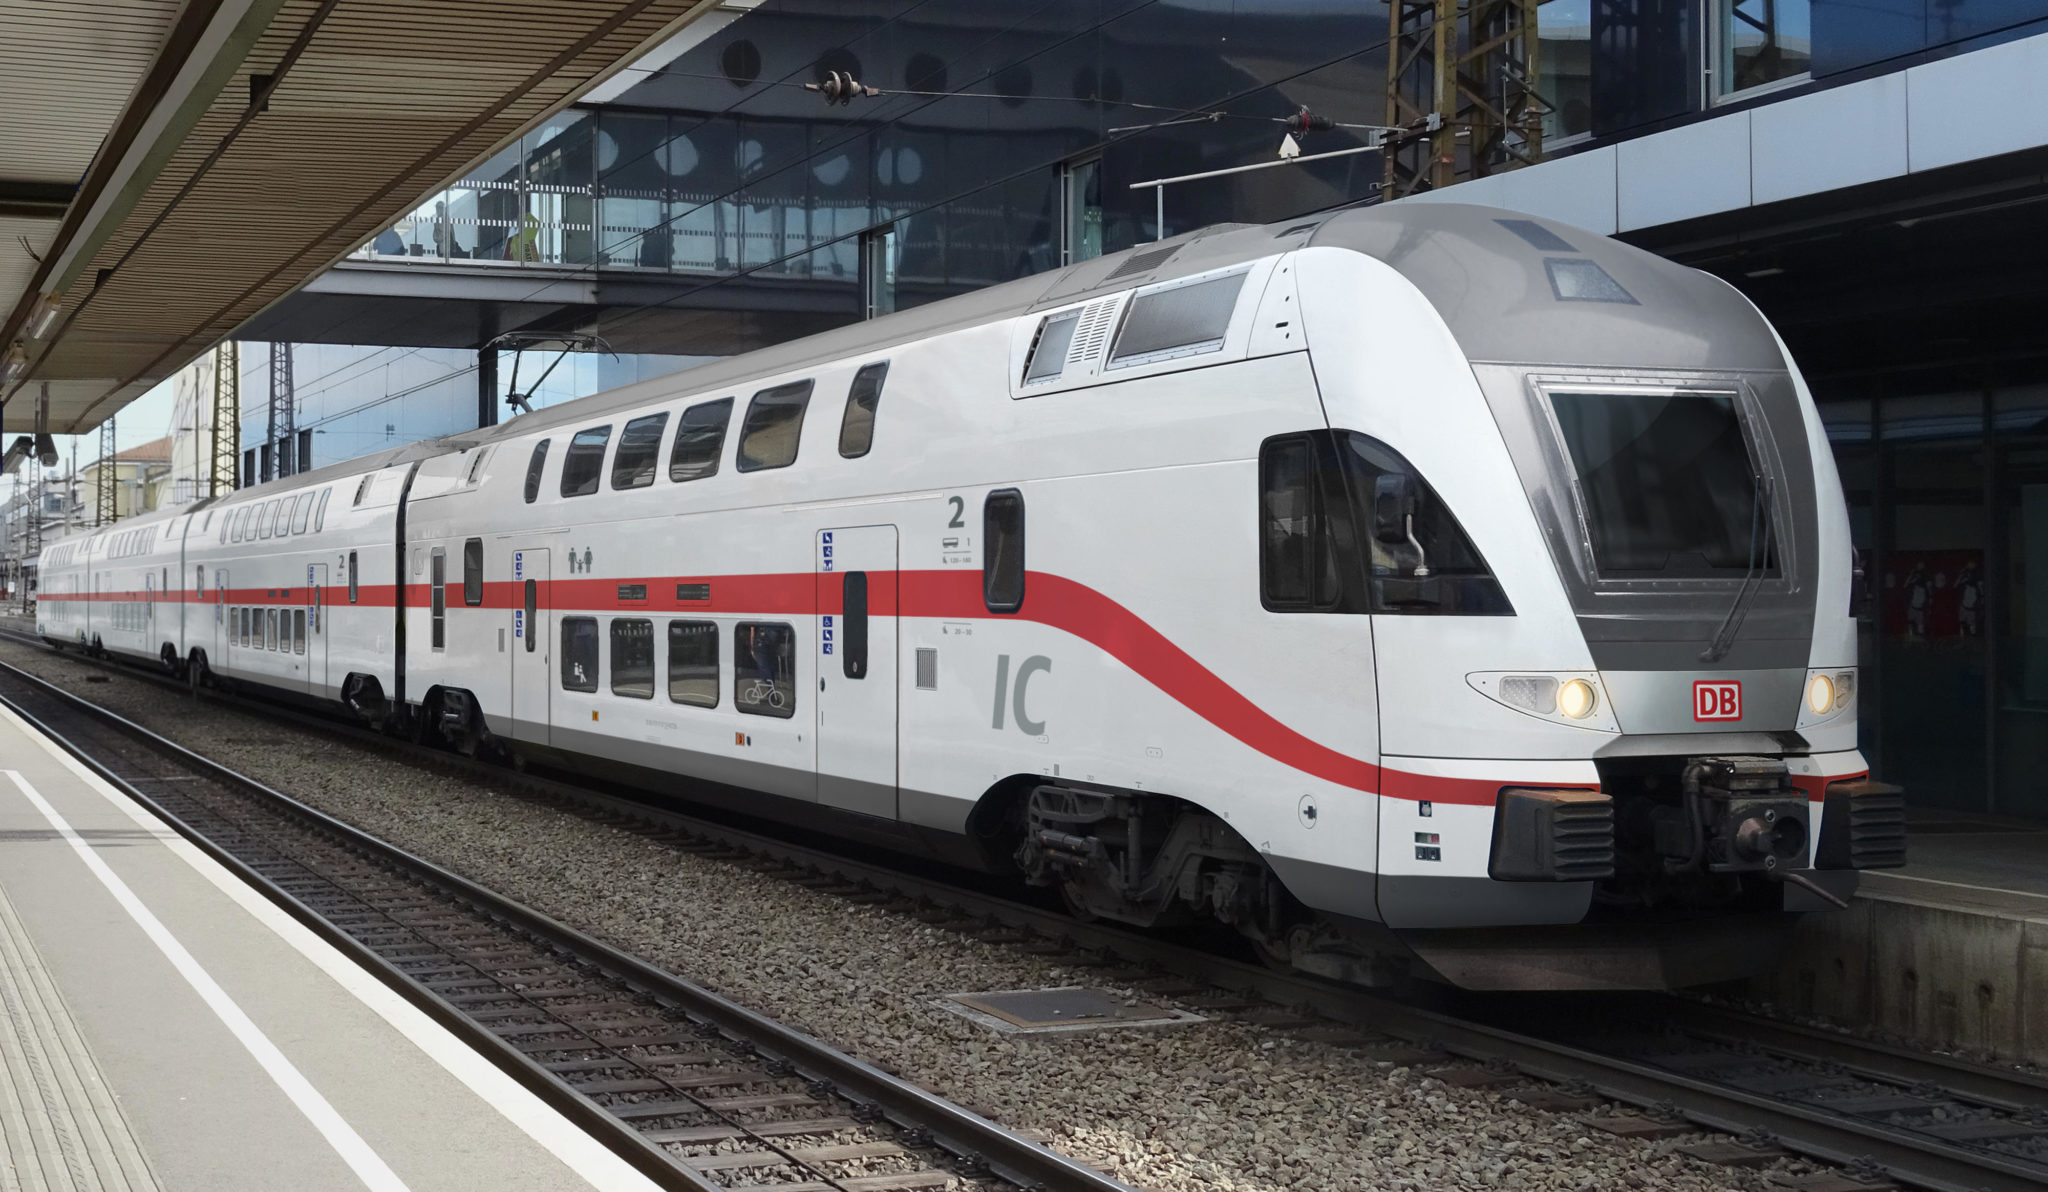 DB Is Expanding Its Intercity Fleet by 17 New Double